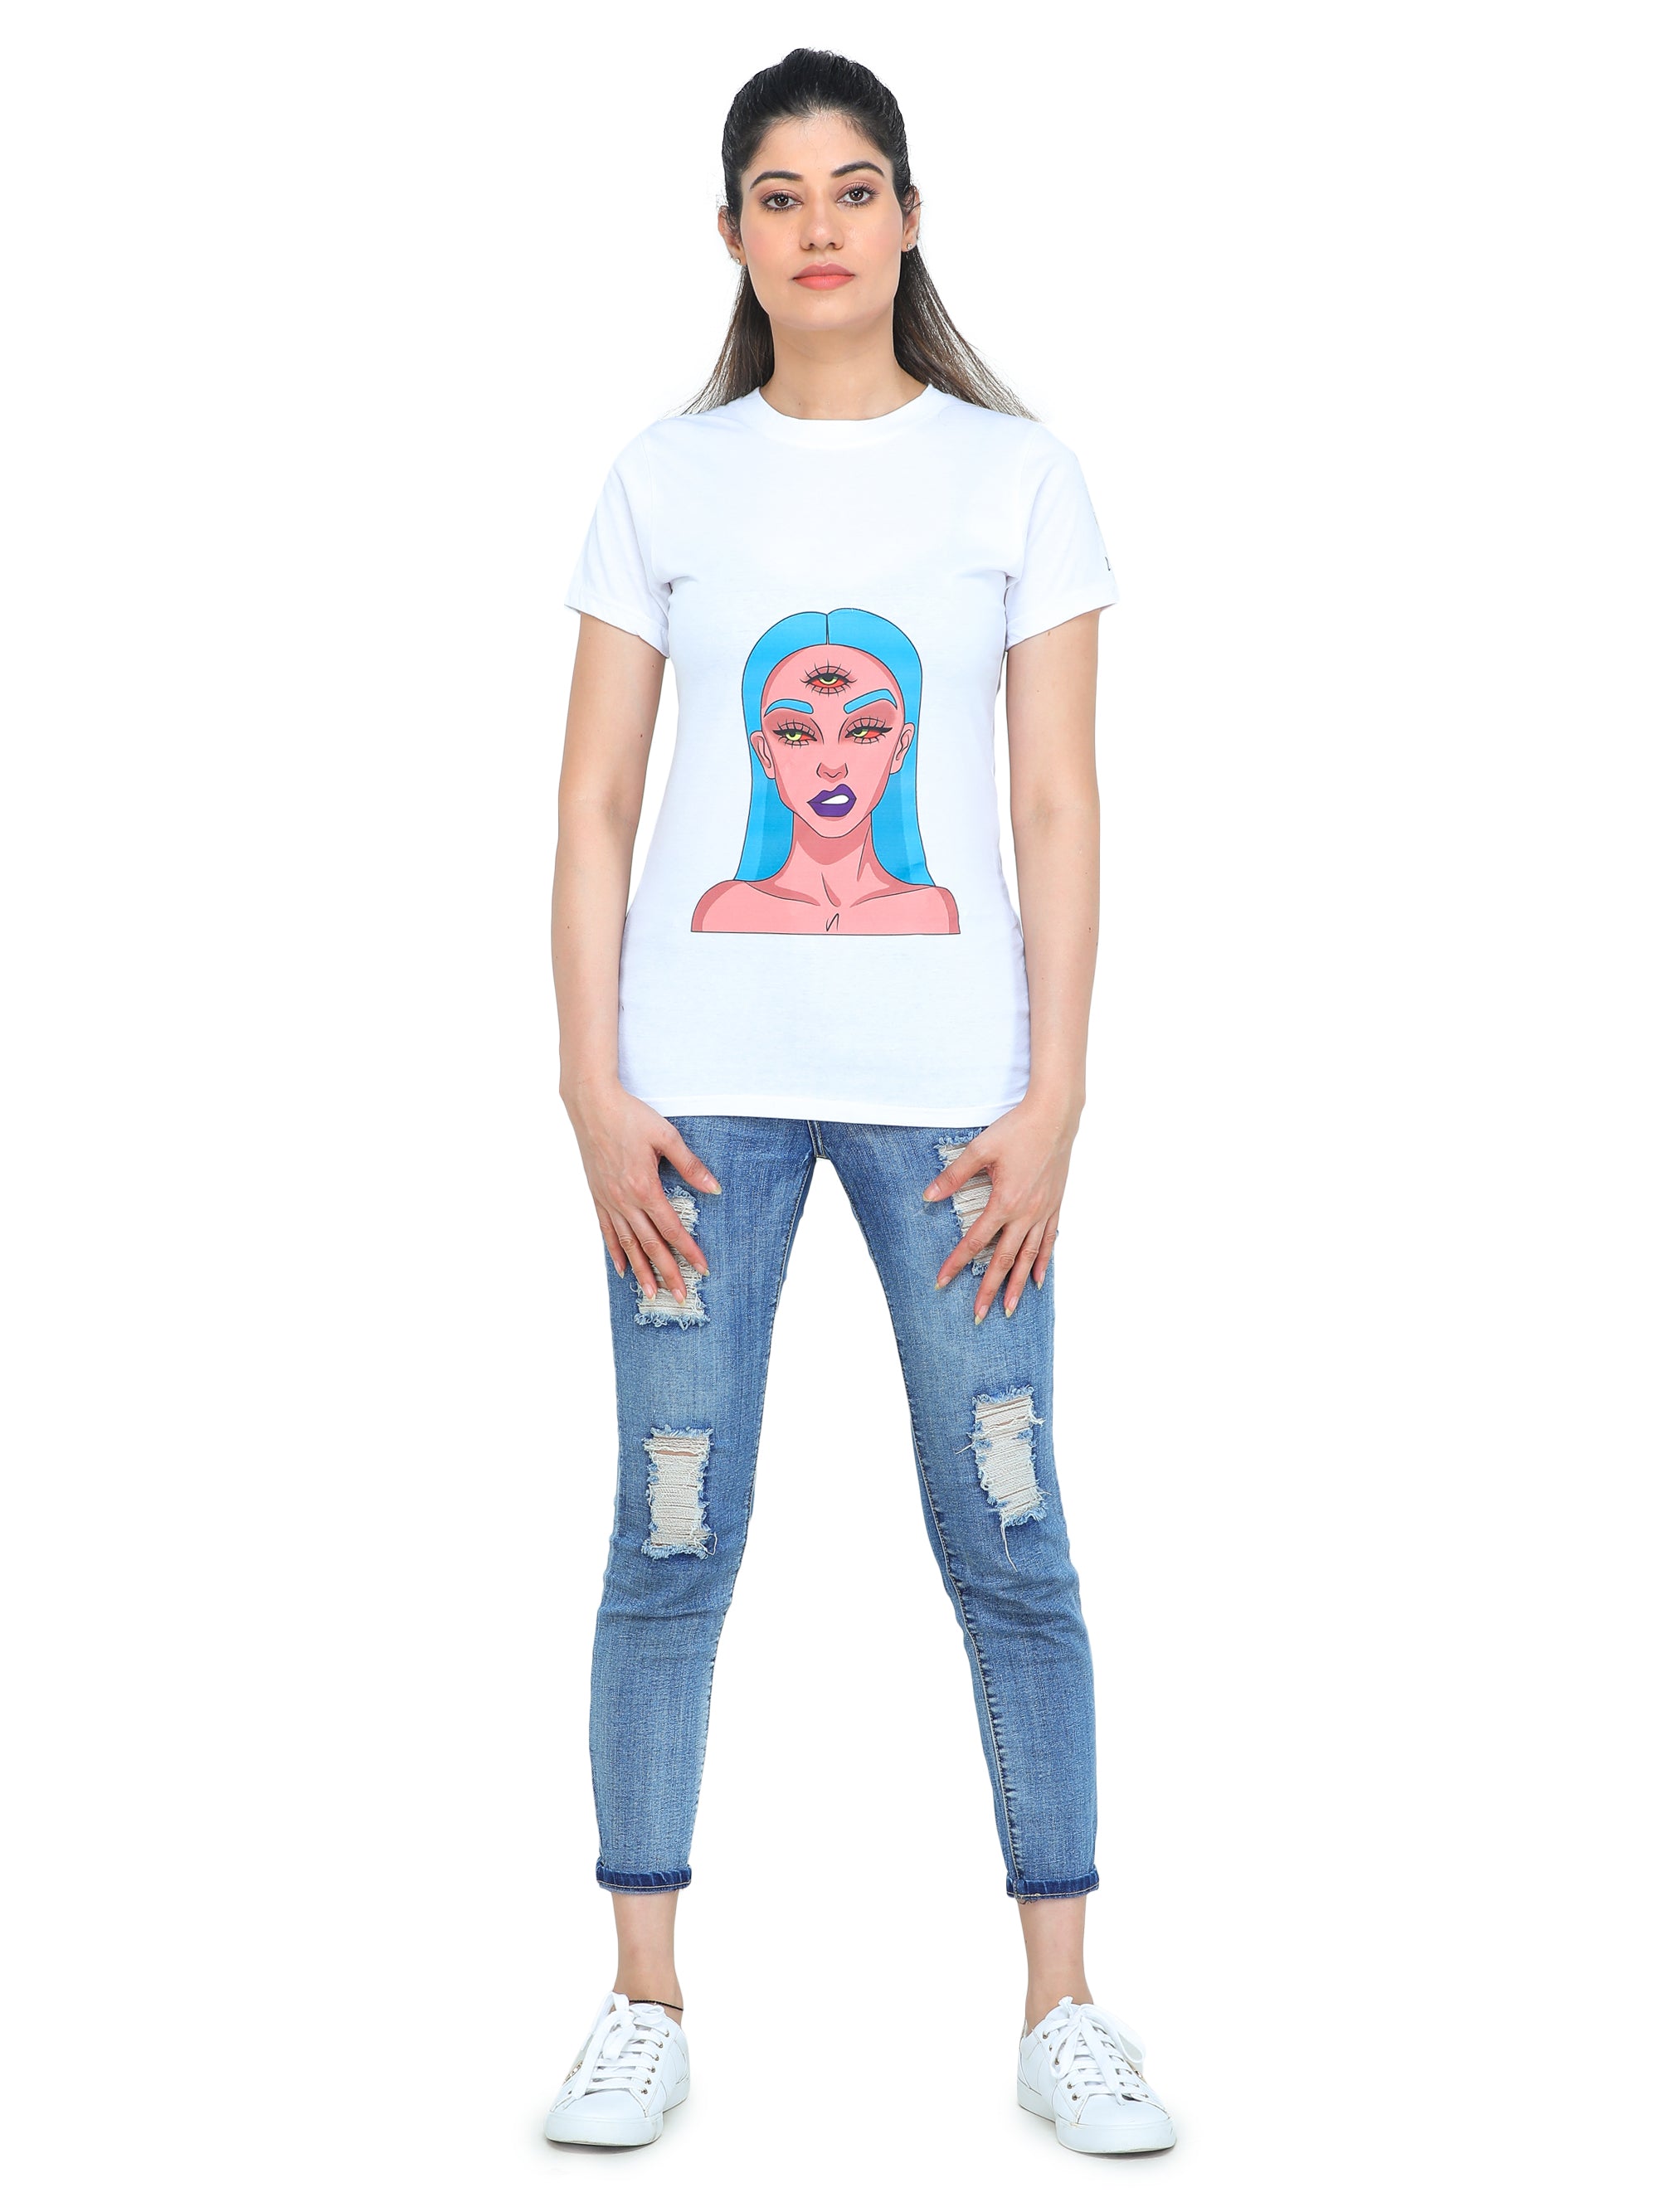 Third Eye T-shirt Collection For Women